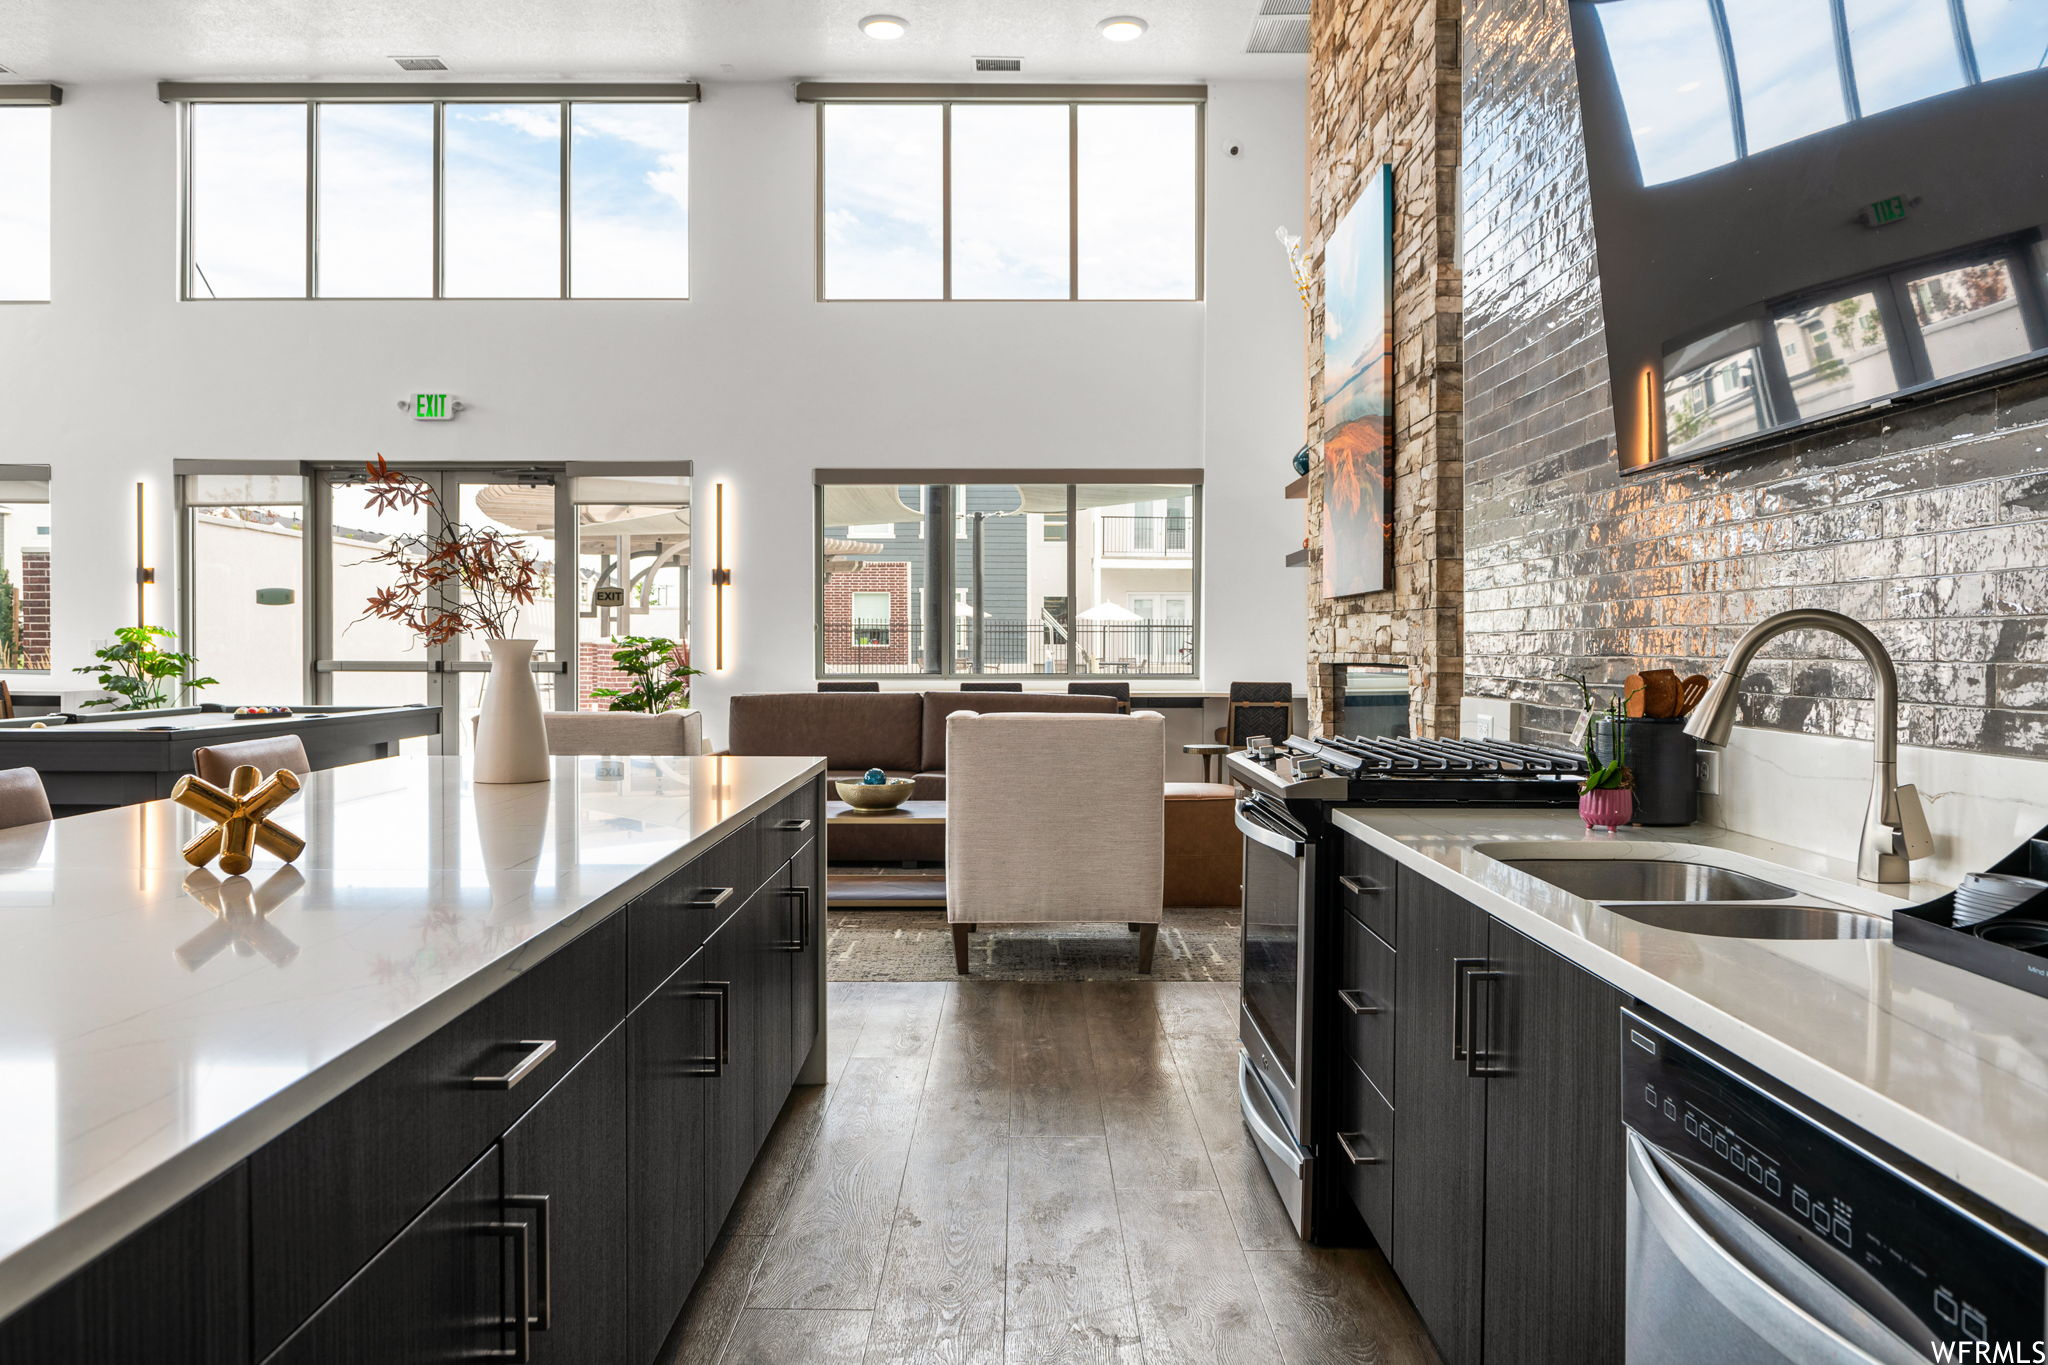 Kitchen featuring dark brown cabinets, light countertops, light hardwood flooring, dishwashing machine, a high ceiling, and stainless steel range with gas stovetop